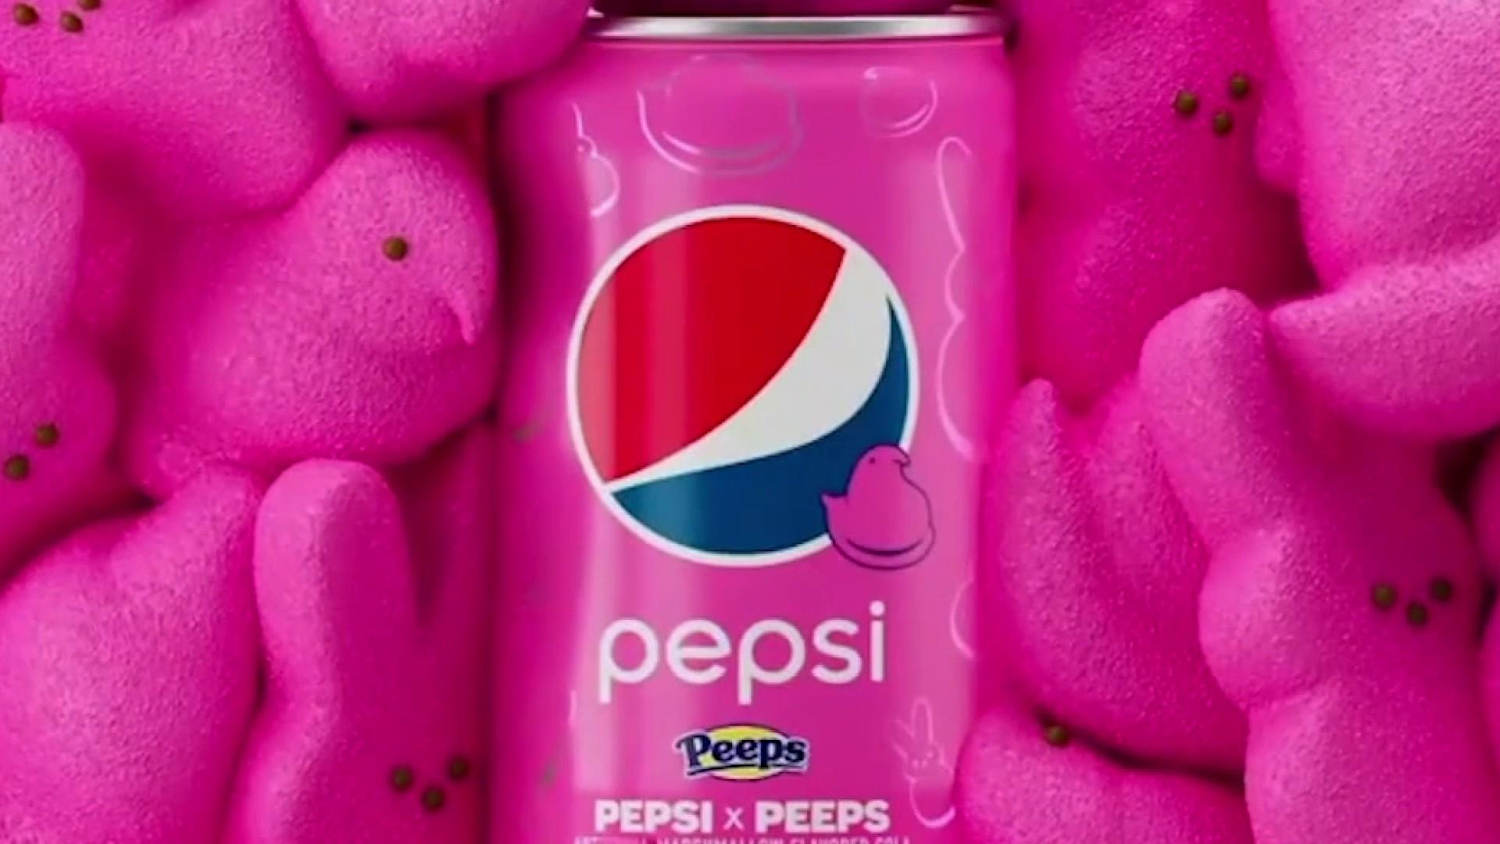 Pepsi x Peeps Limited Edition Sunglasses Promotional Branded Advertising